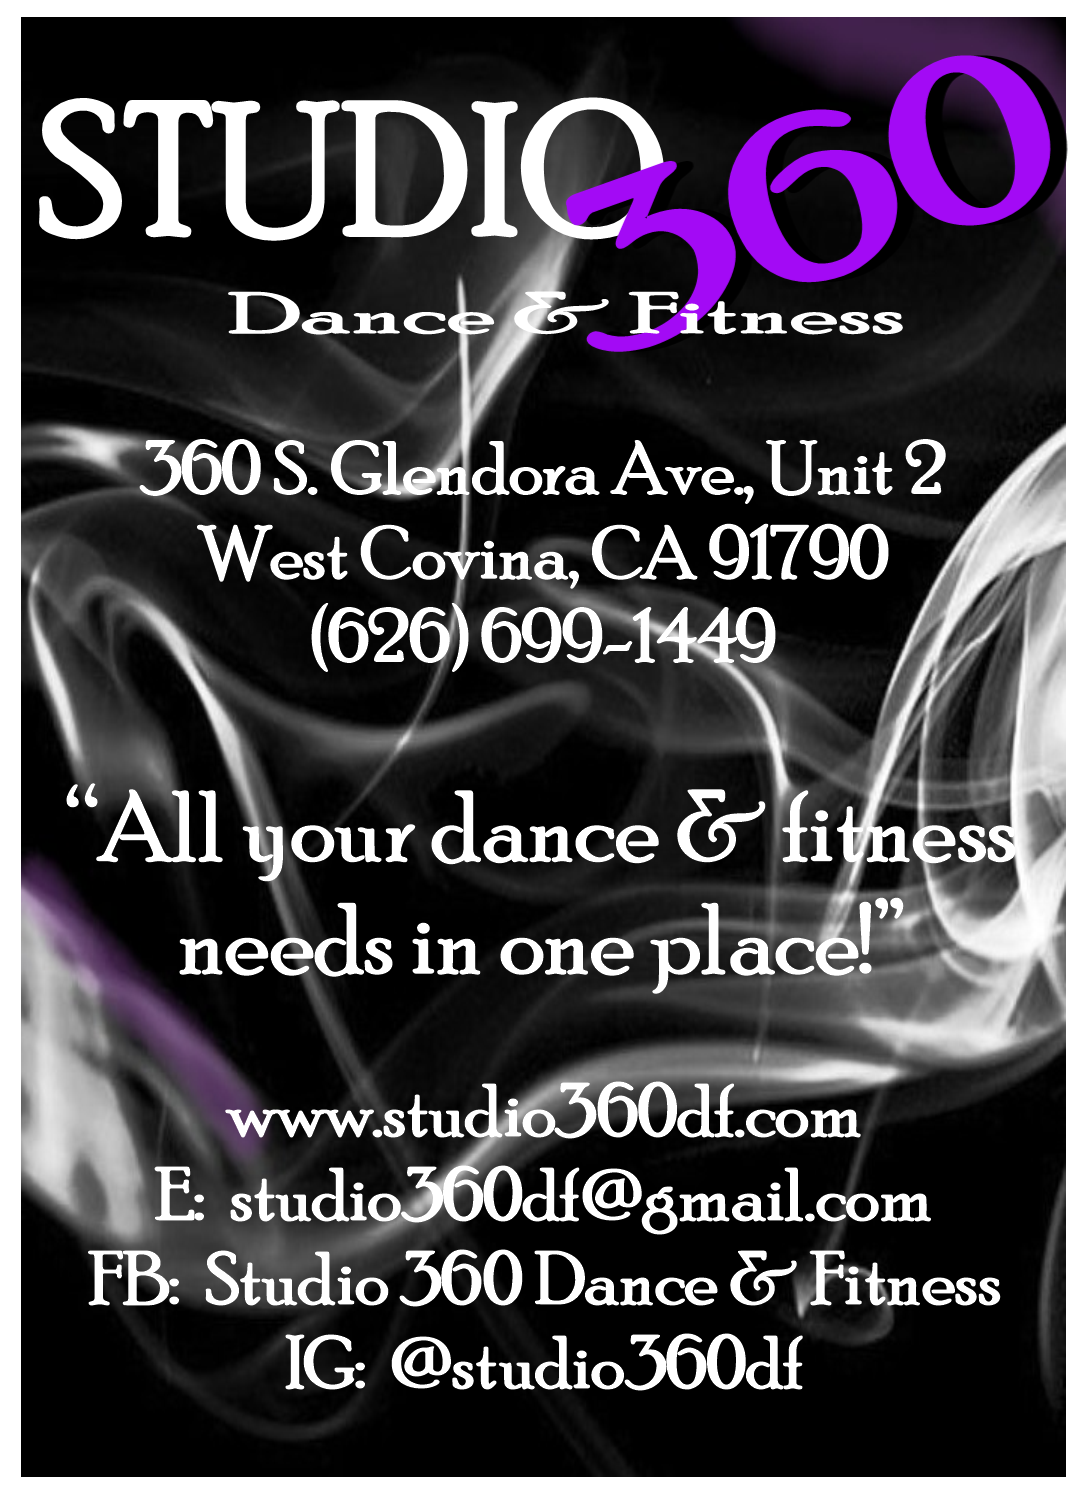 Dance Classes, Spin Classes, Dance, Pole Fitness, Fitness Classes, Certified Fitness Instructor, Folklorico Dance Classes, Total body, belly dance, country western 2 step, hip hop, west coast swing, Salsa Dancing